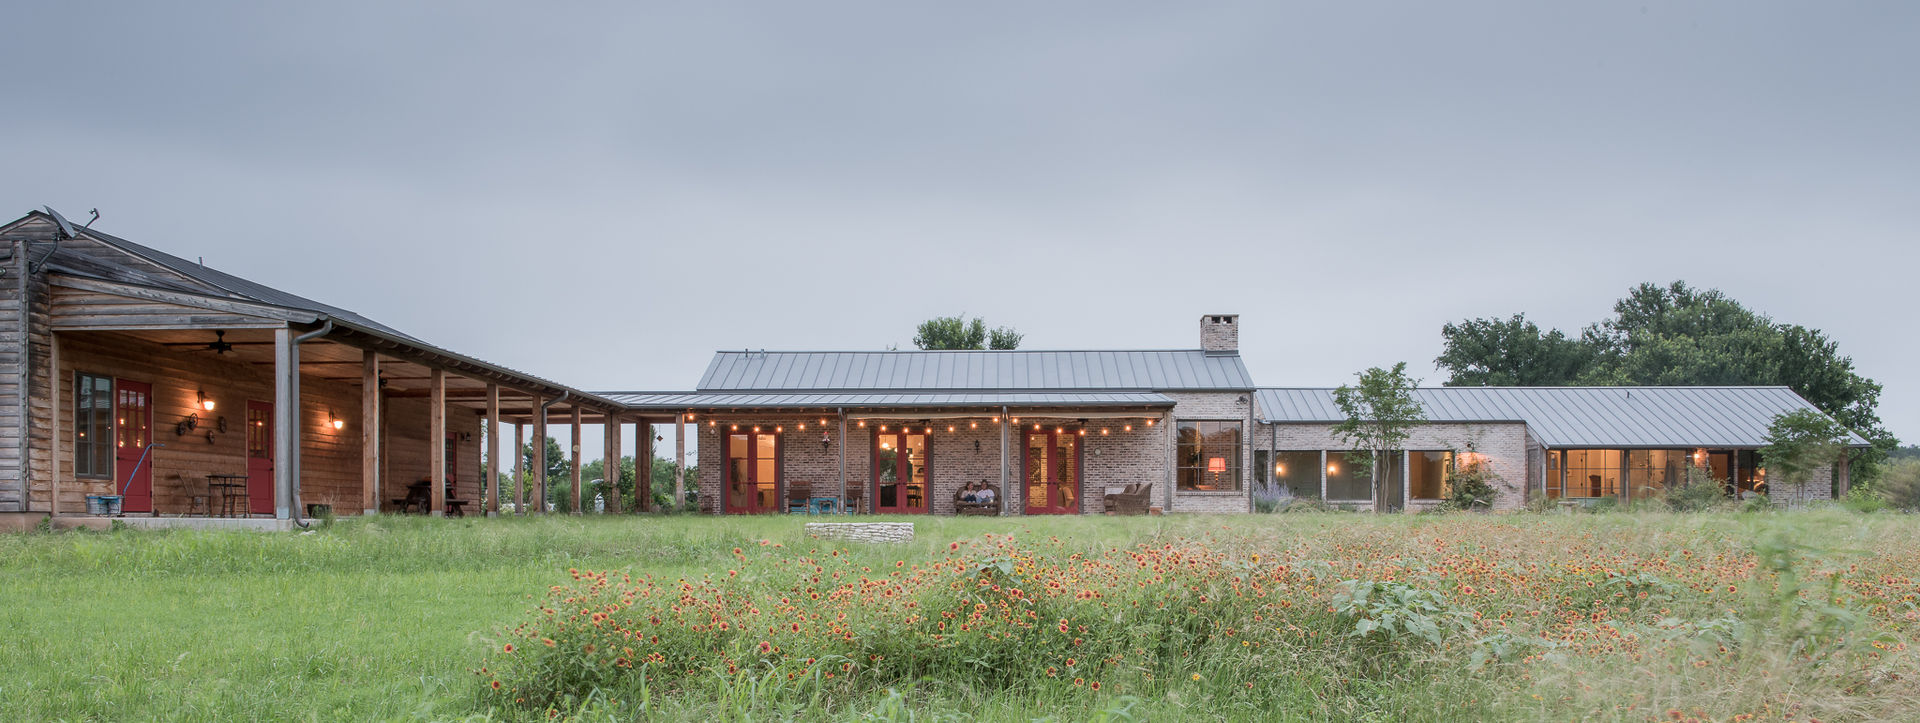 River Ranch Residence Hugh Jefferson Randolph Architects Country style houses